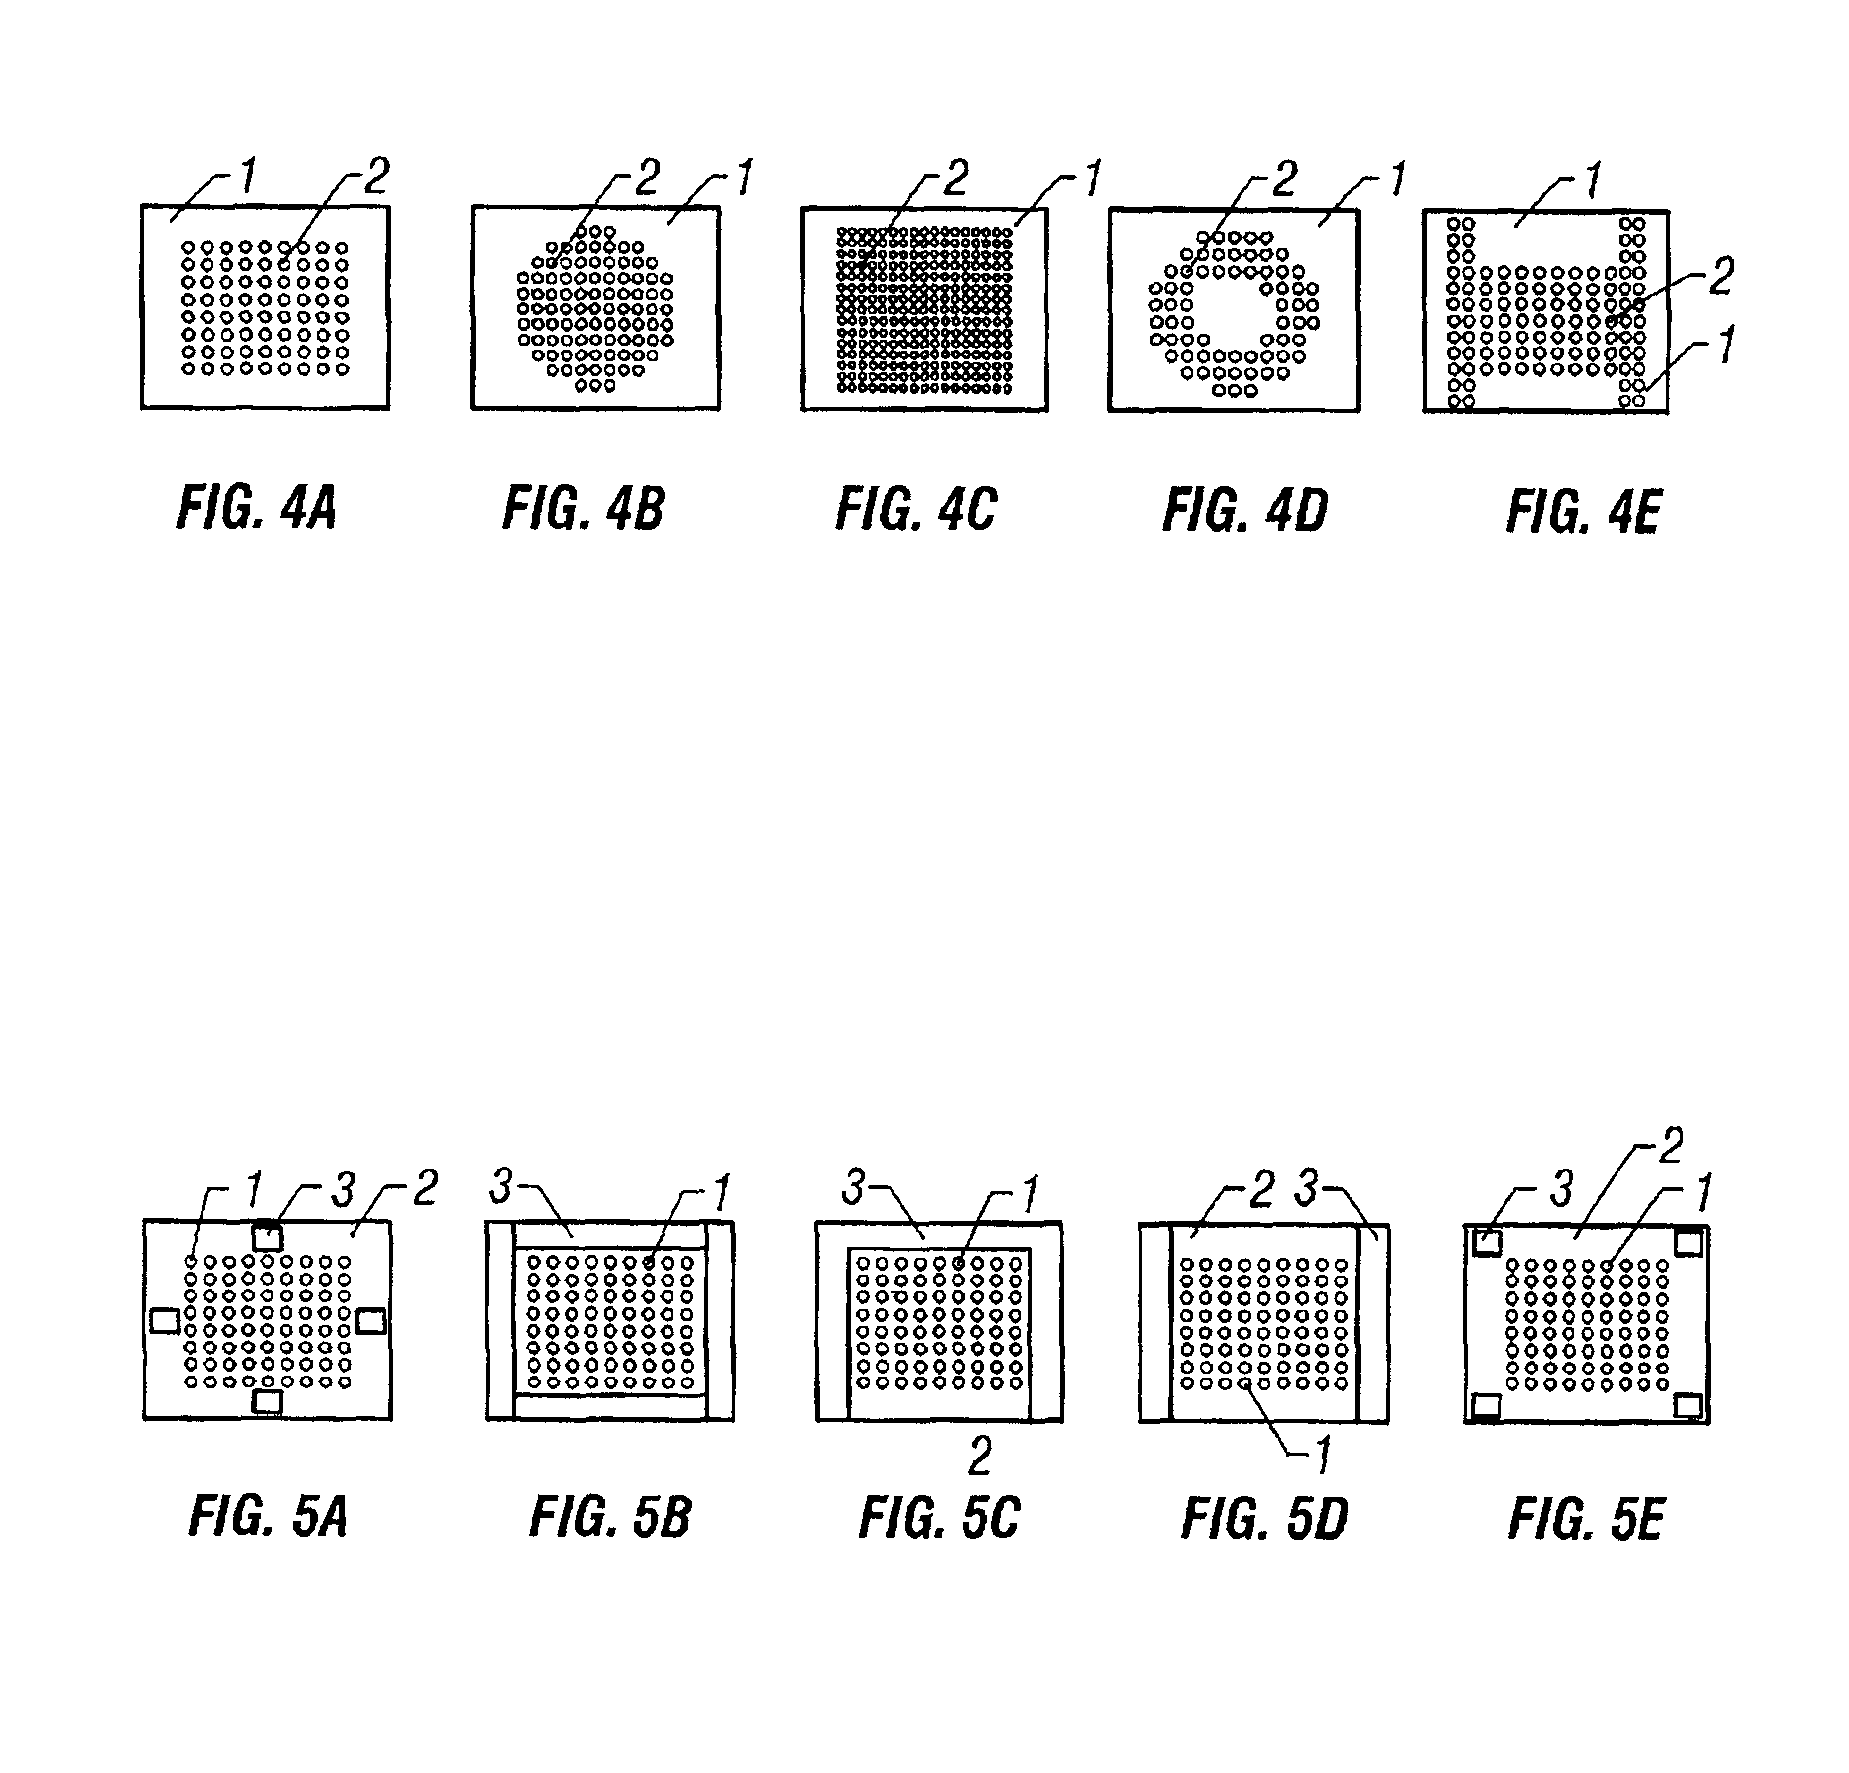 Attachment of surface mount devices to printed circuit boards using a thermoplastic adhesive